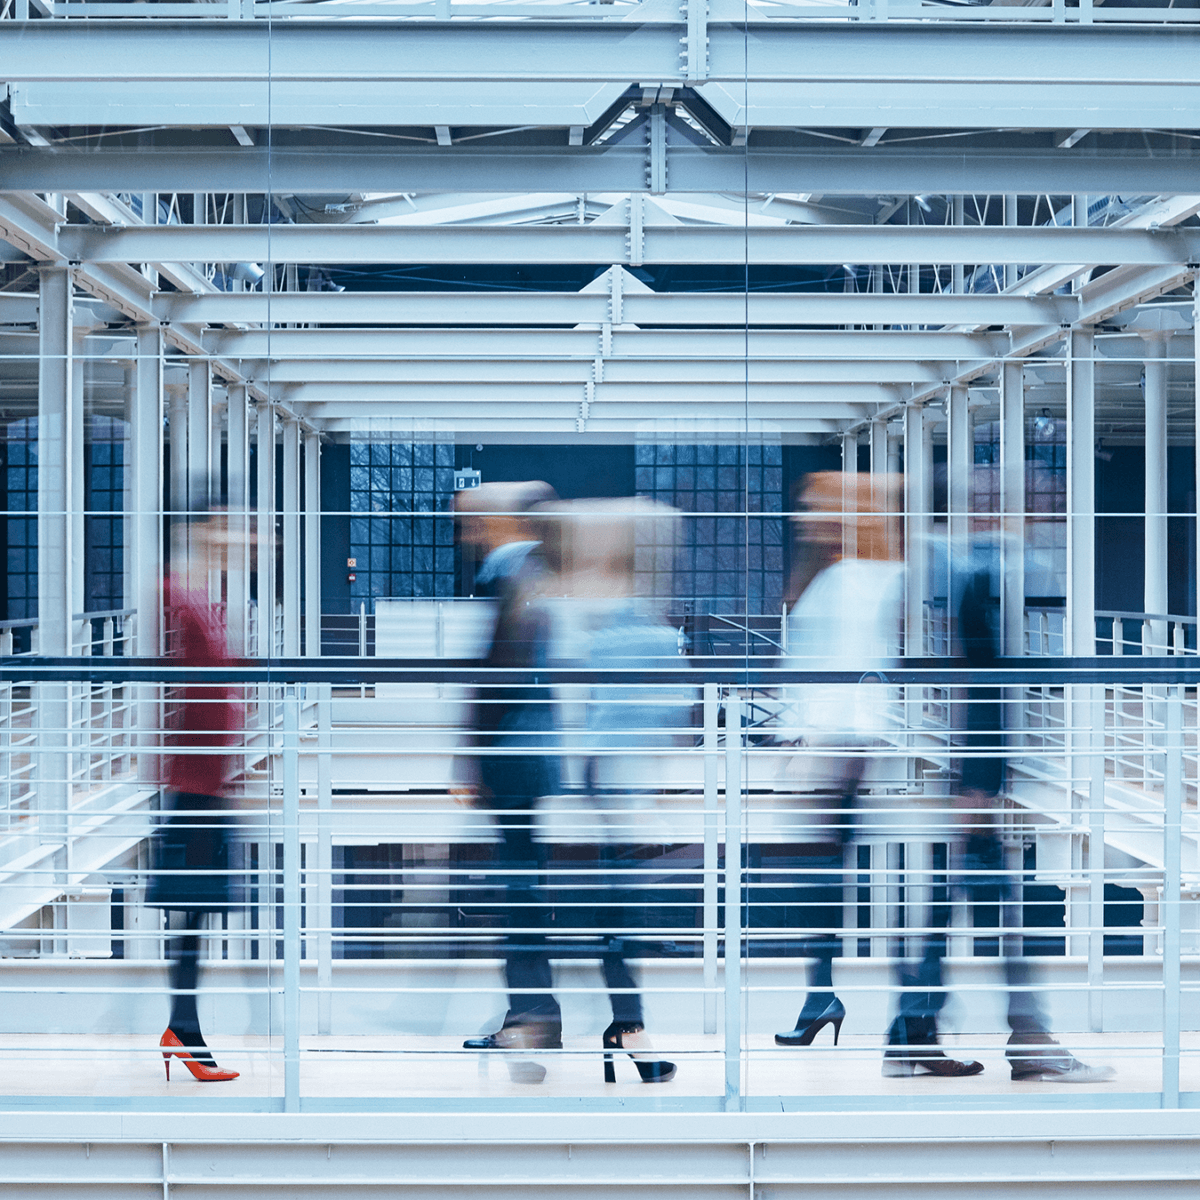 An image of an office with blurred figures in suits walking along a walkway. Three of the figures wear high heels.